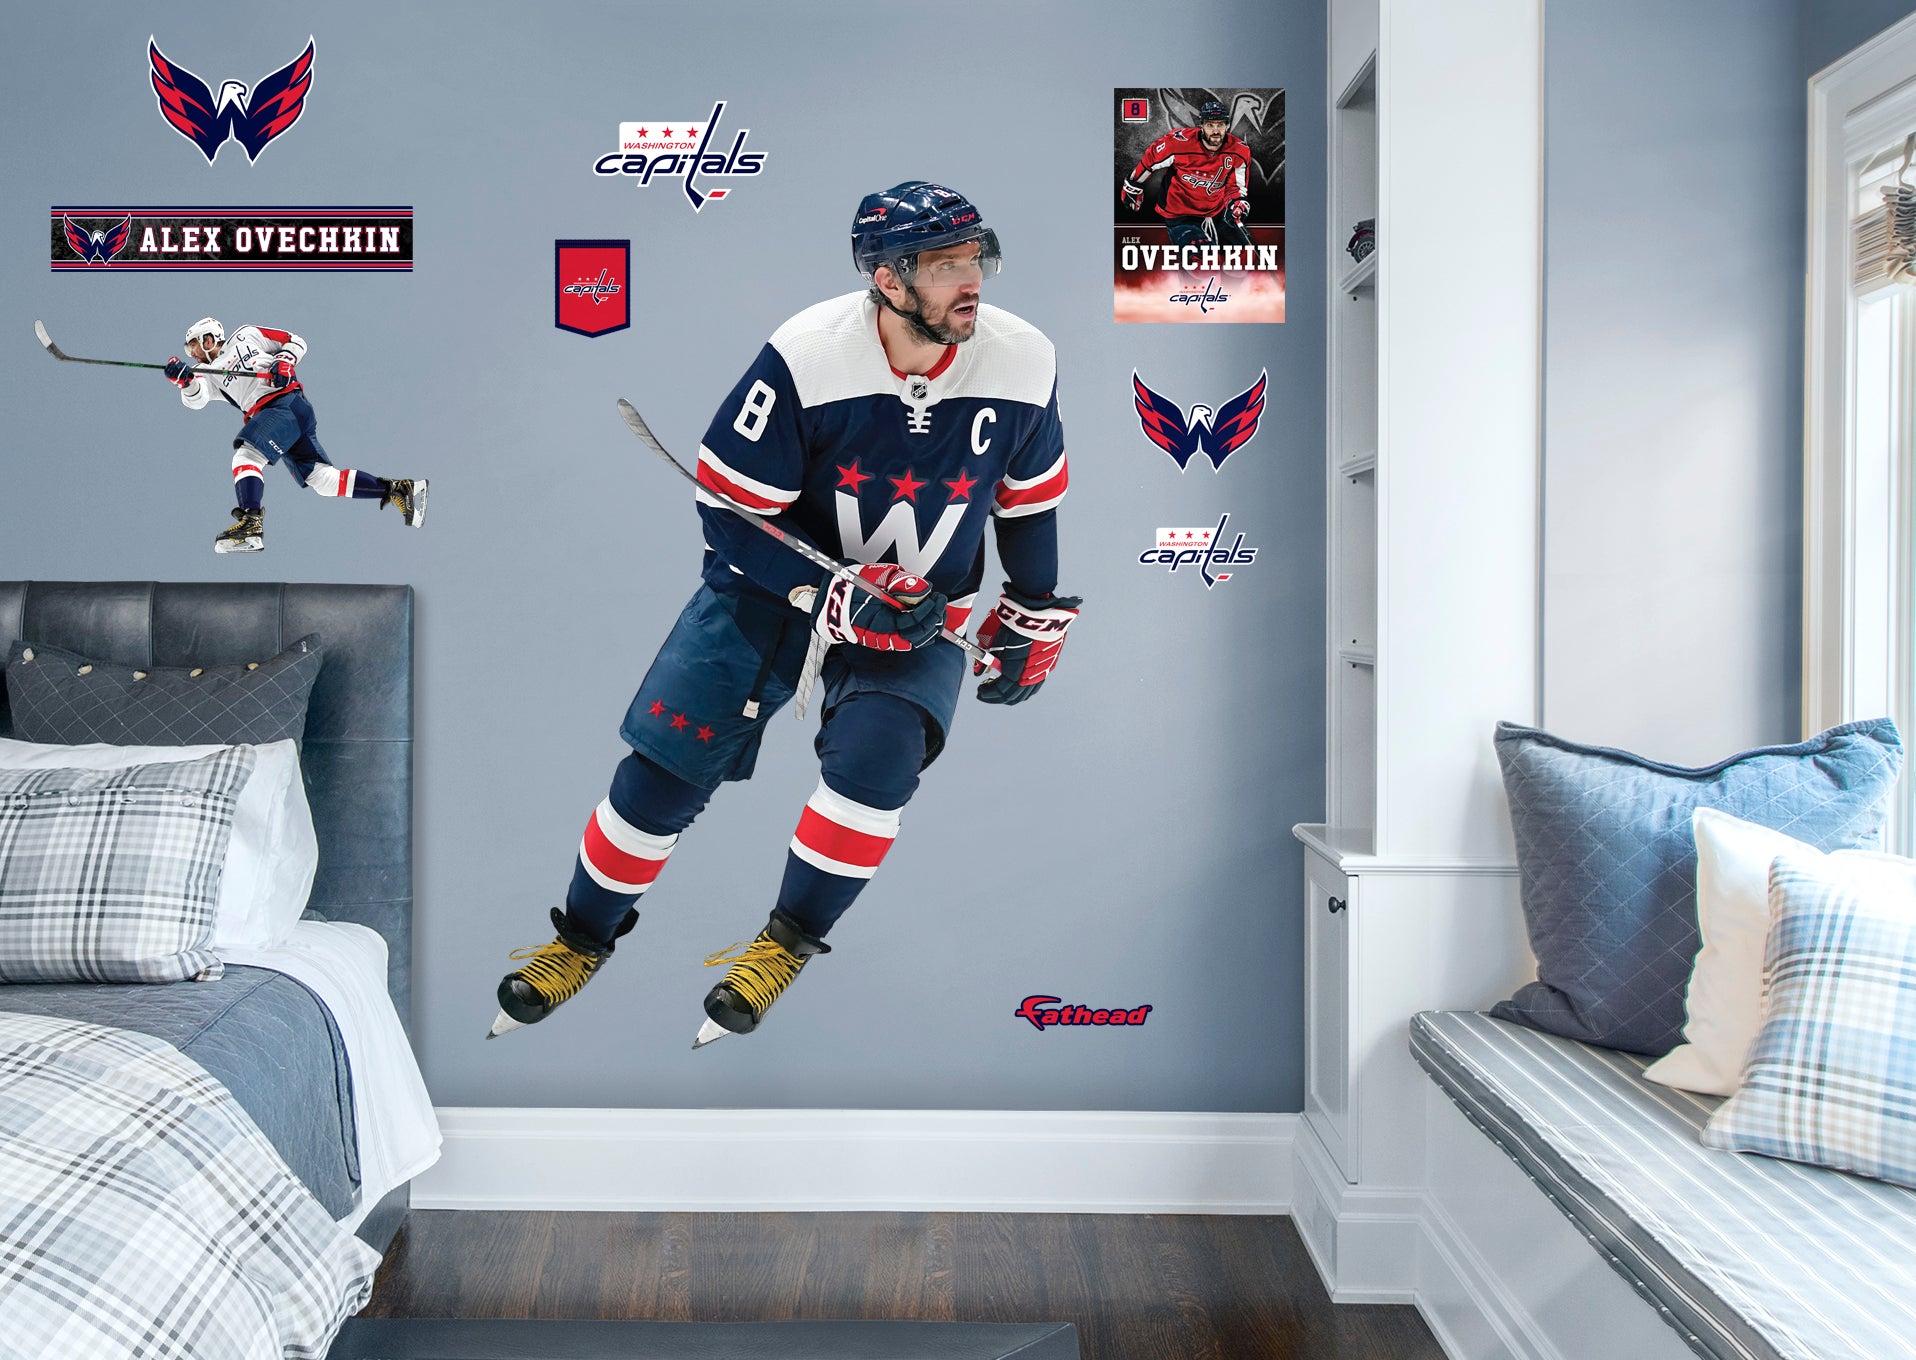 Alex Ovechkin 2021 Navy for Washington Capitals - Officially Licensed NHL Removable Wall Decal Life-Size Athlete + 9 Decals by F